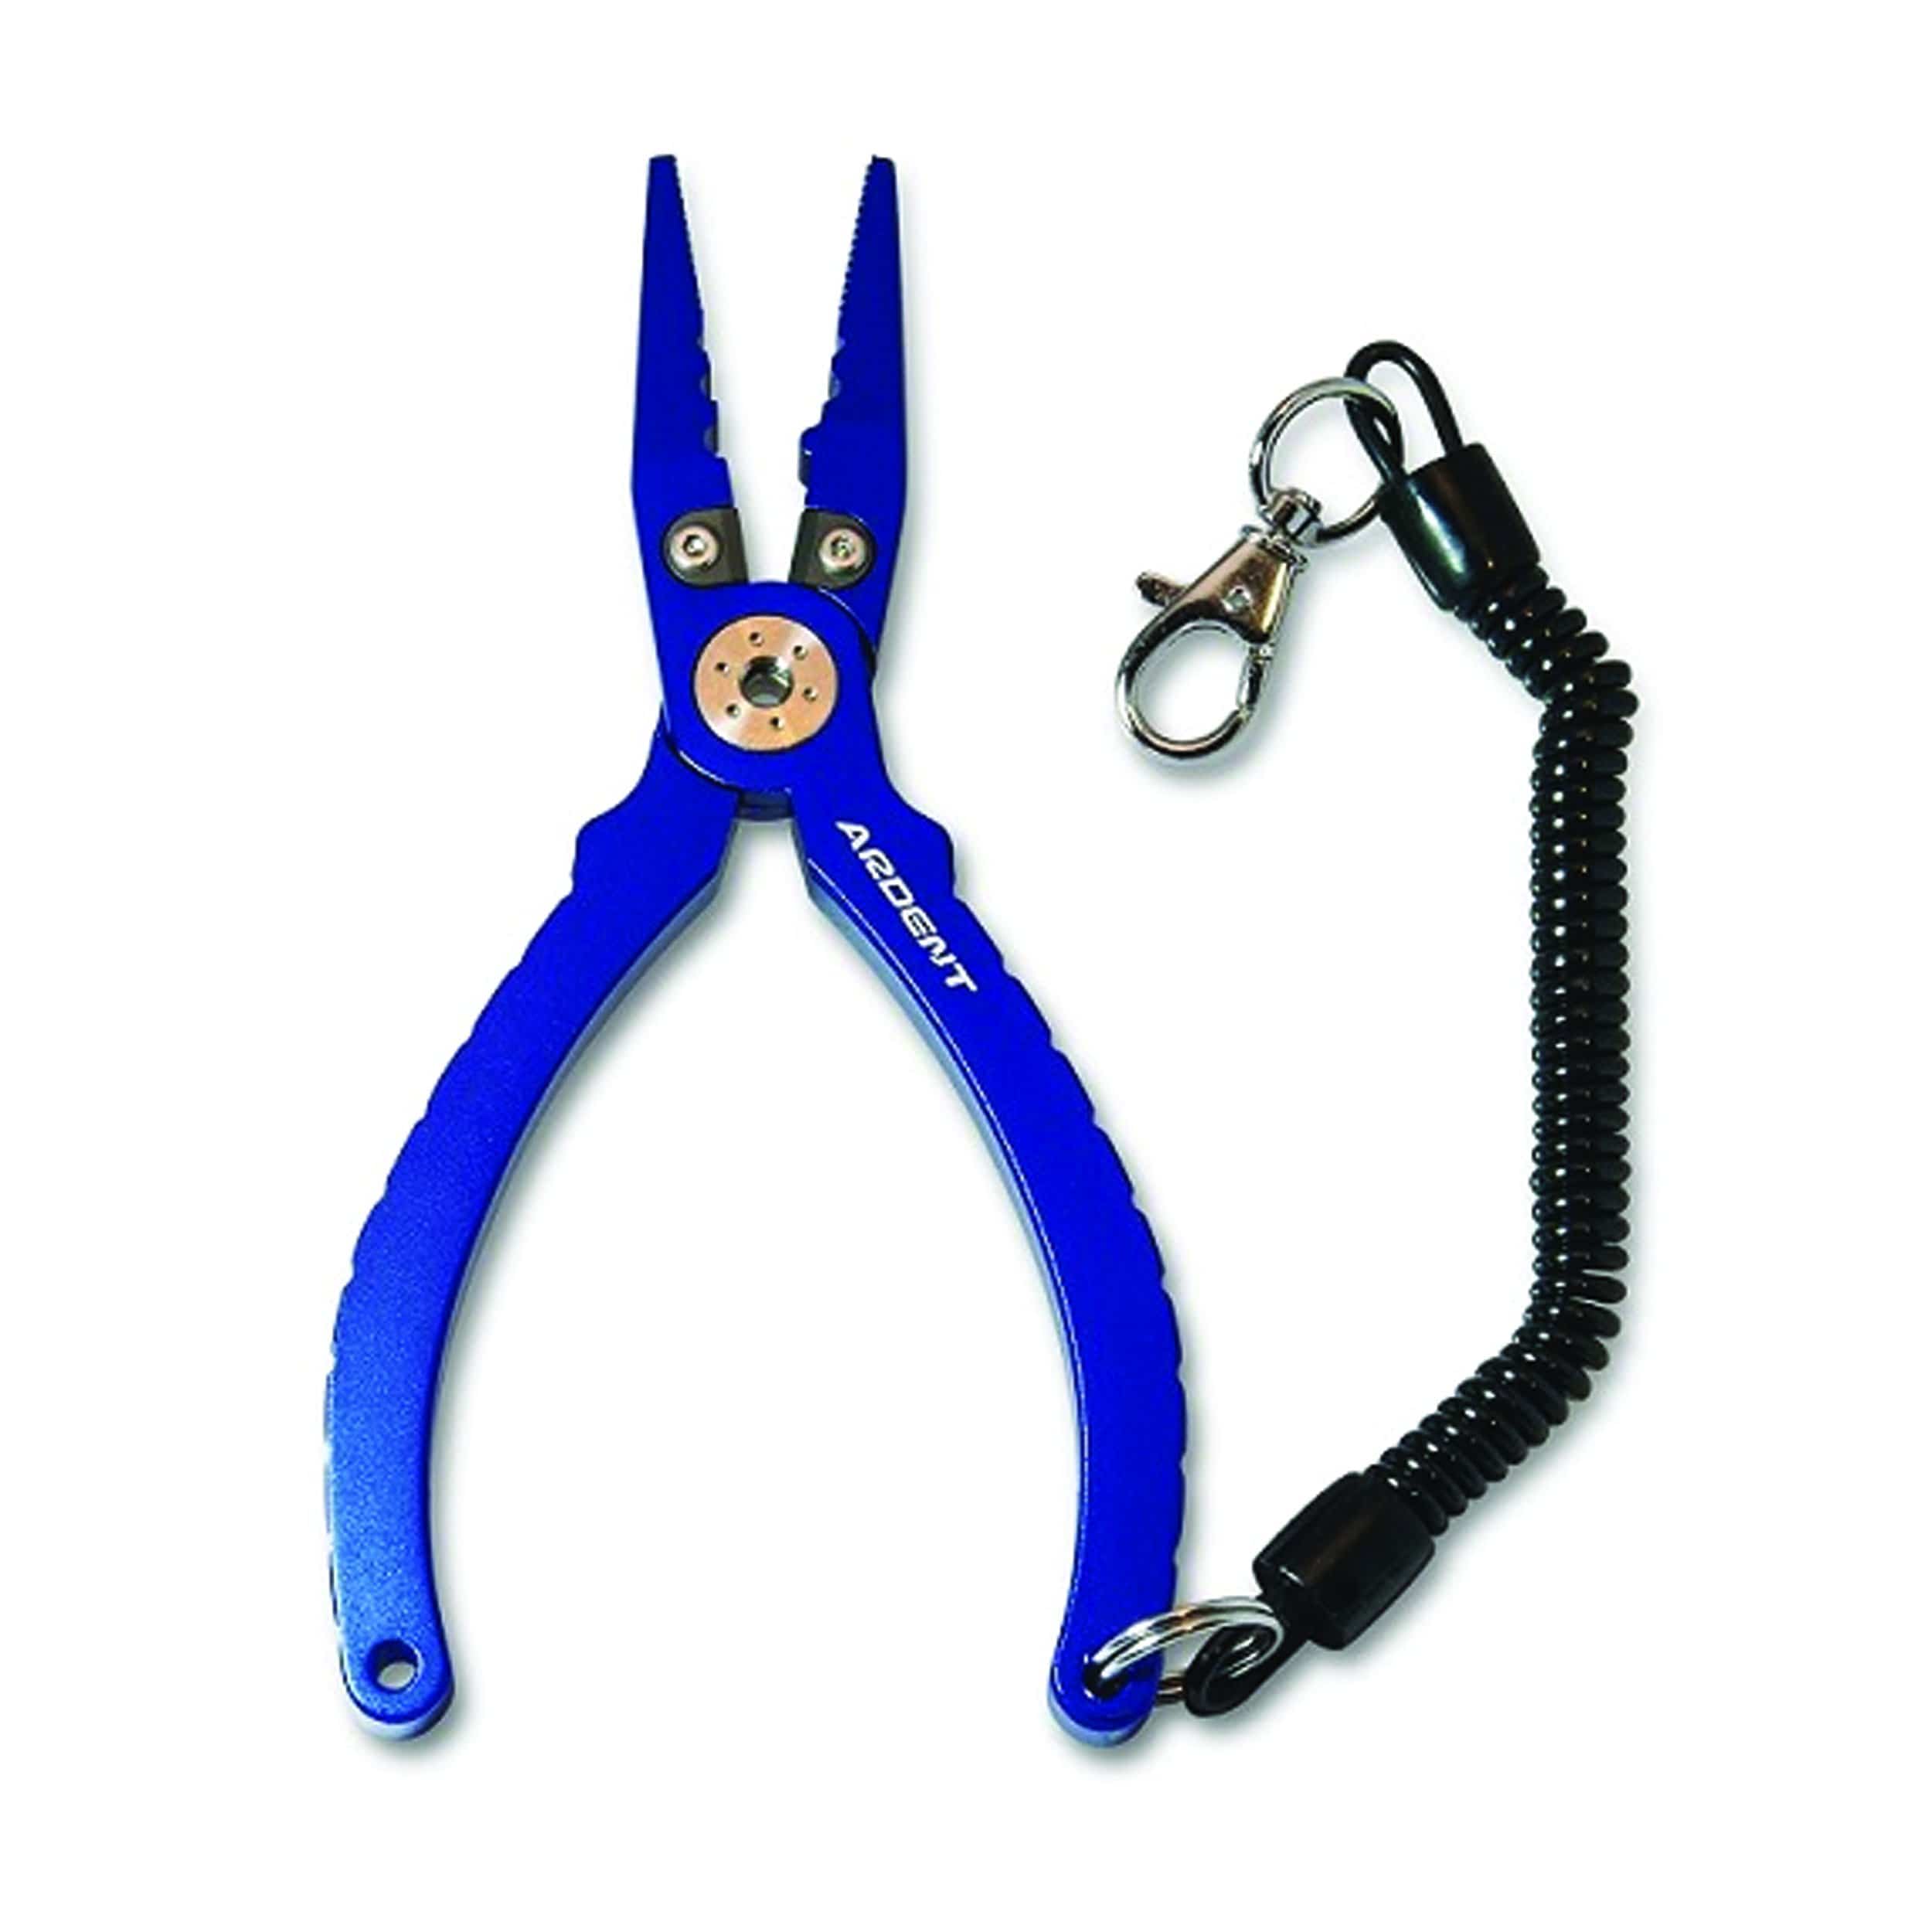 Ardent Fishing : Tools Ardent 6 1/2in Aluminum Fishing Pliers